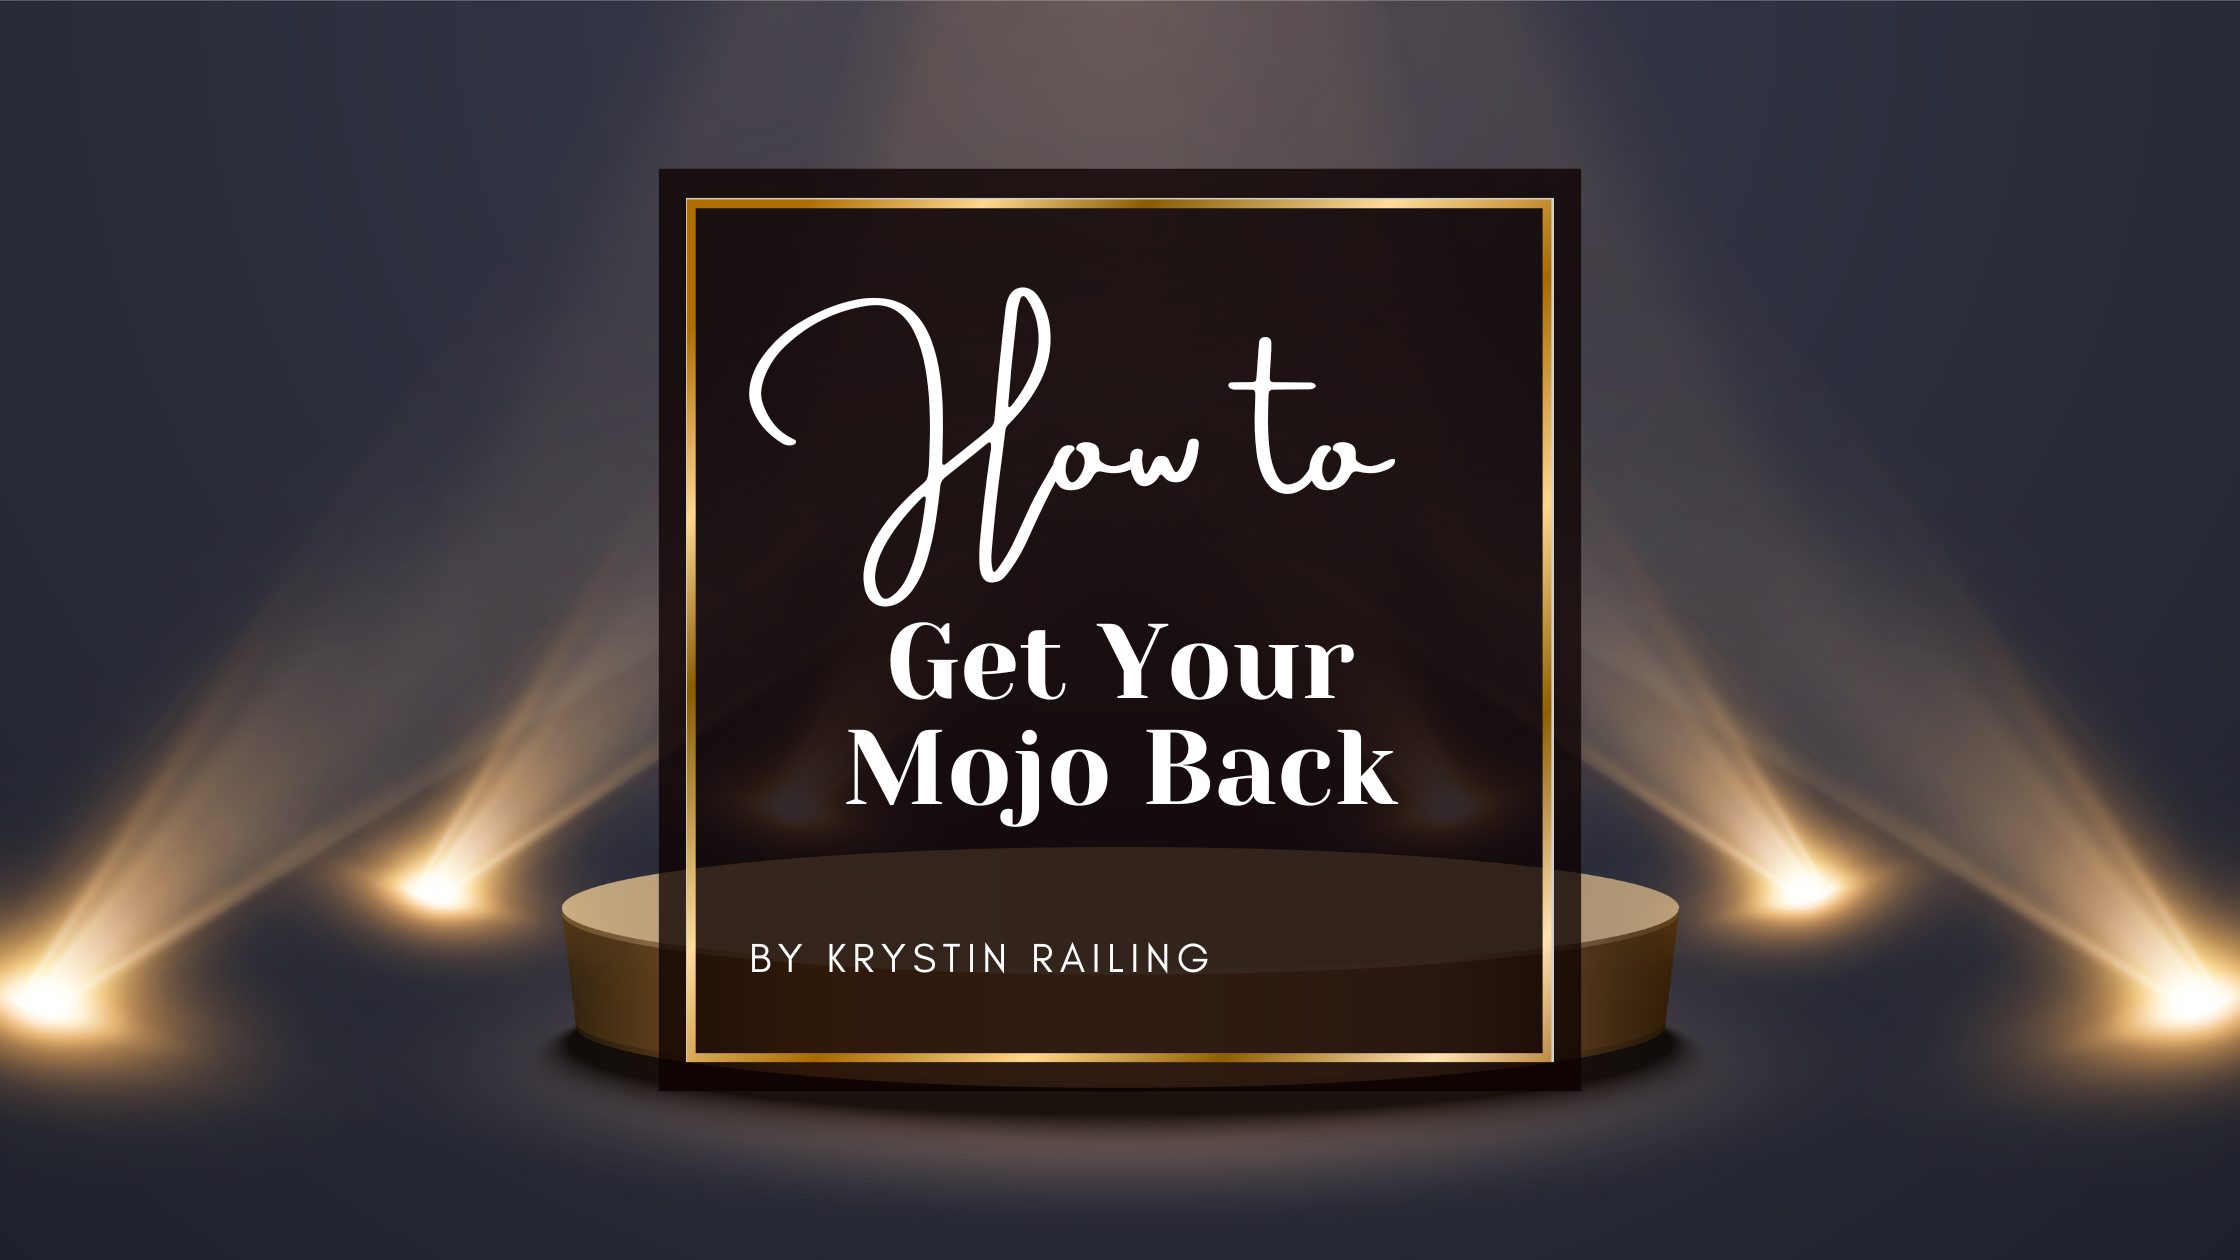 Tips to Get Your Mojo Back